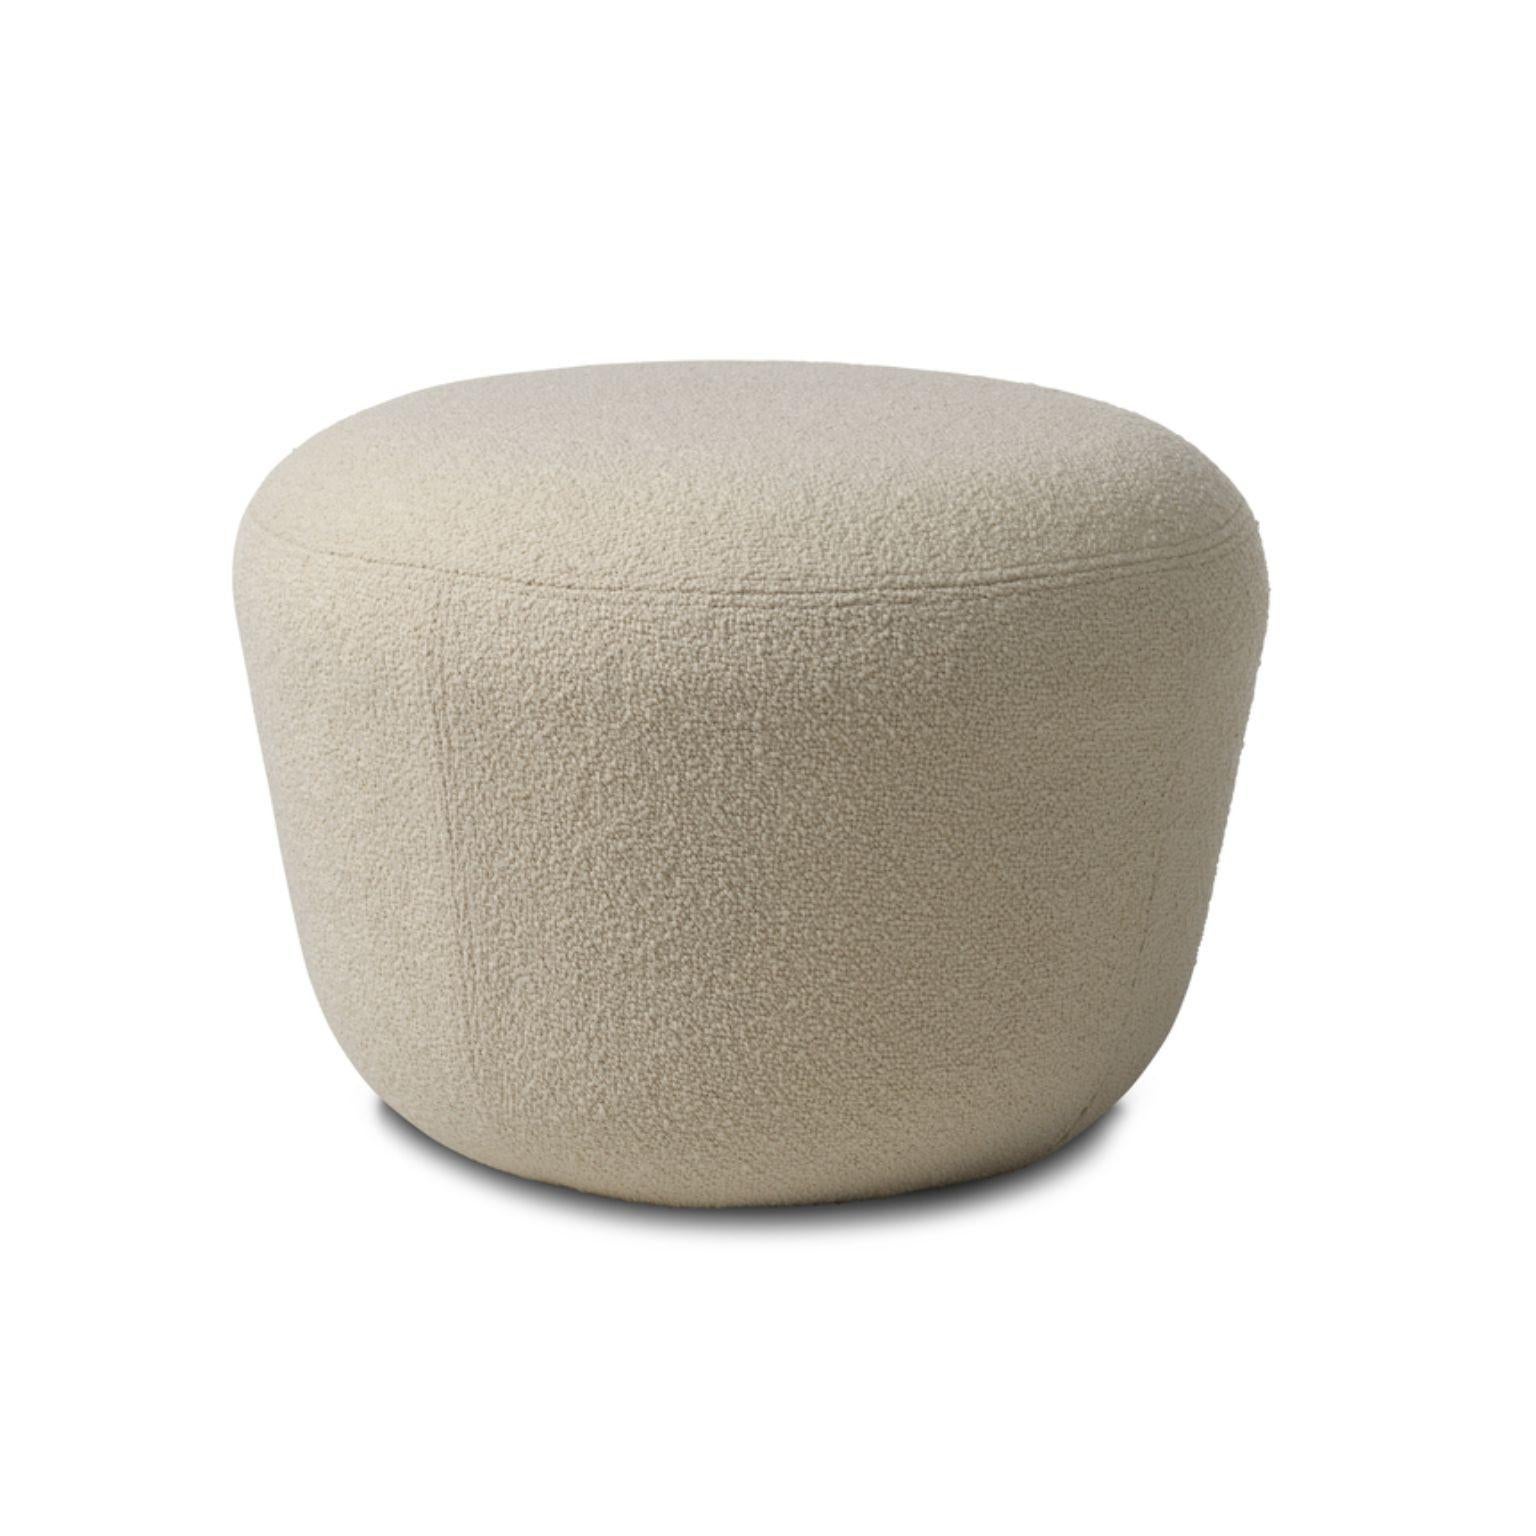 Contemporary Haven Sprinkles Eggplant Pouf by Warm Nordic For Sale